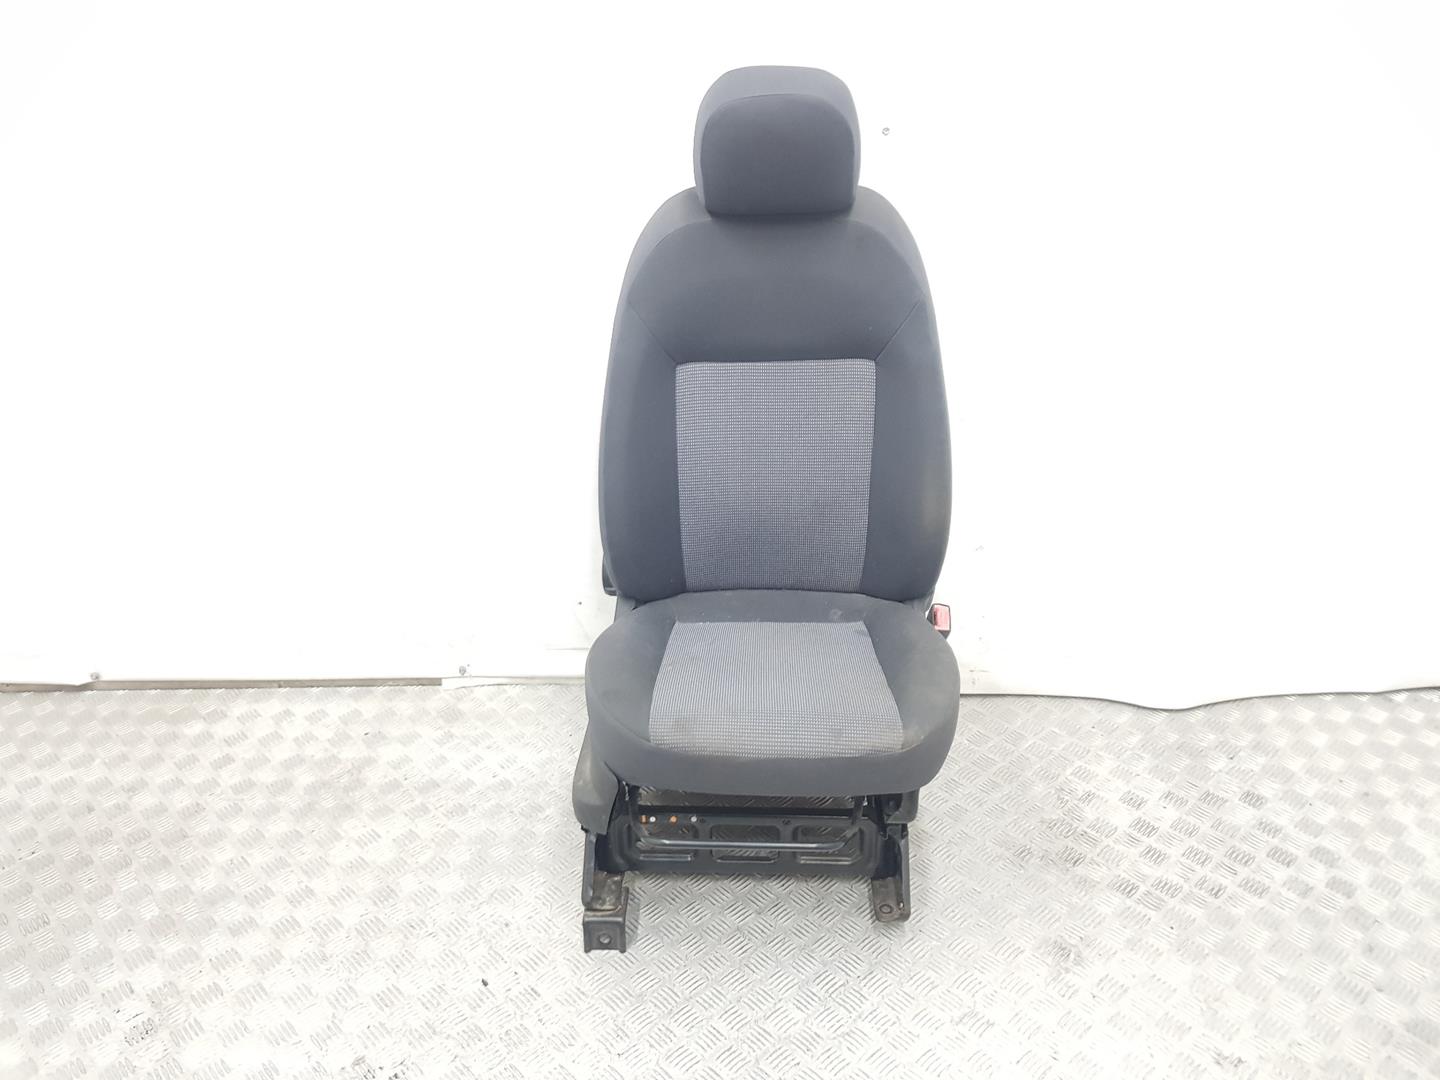 PEUGEOT Bipper 1 generation (2008-2020) Front Right Seat ASIENTOTELA, ASIENTOACOMPAÑANTE 19821993